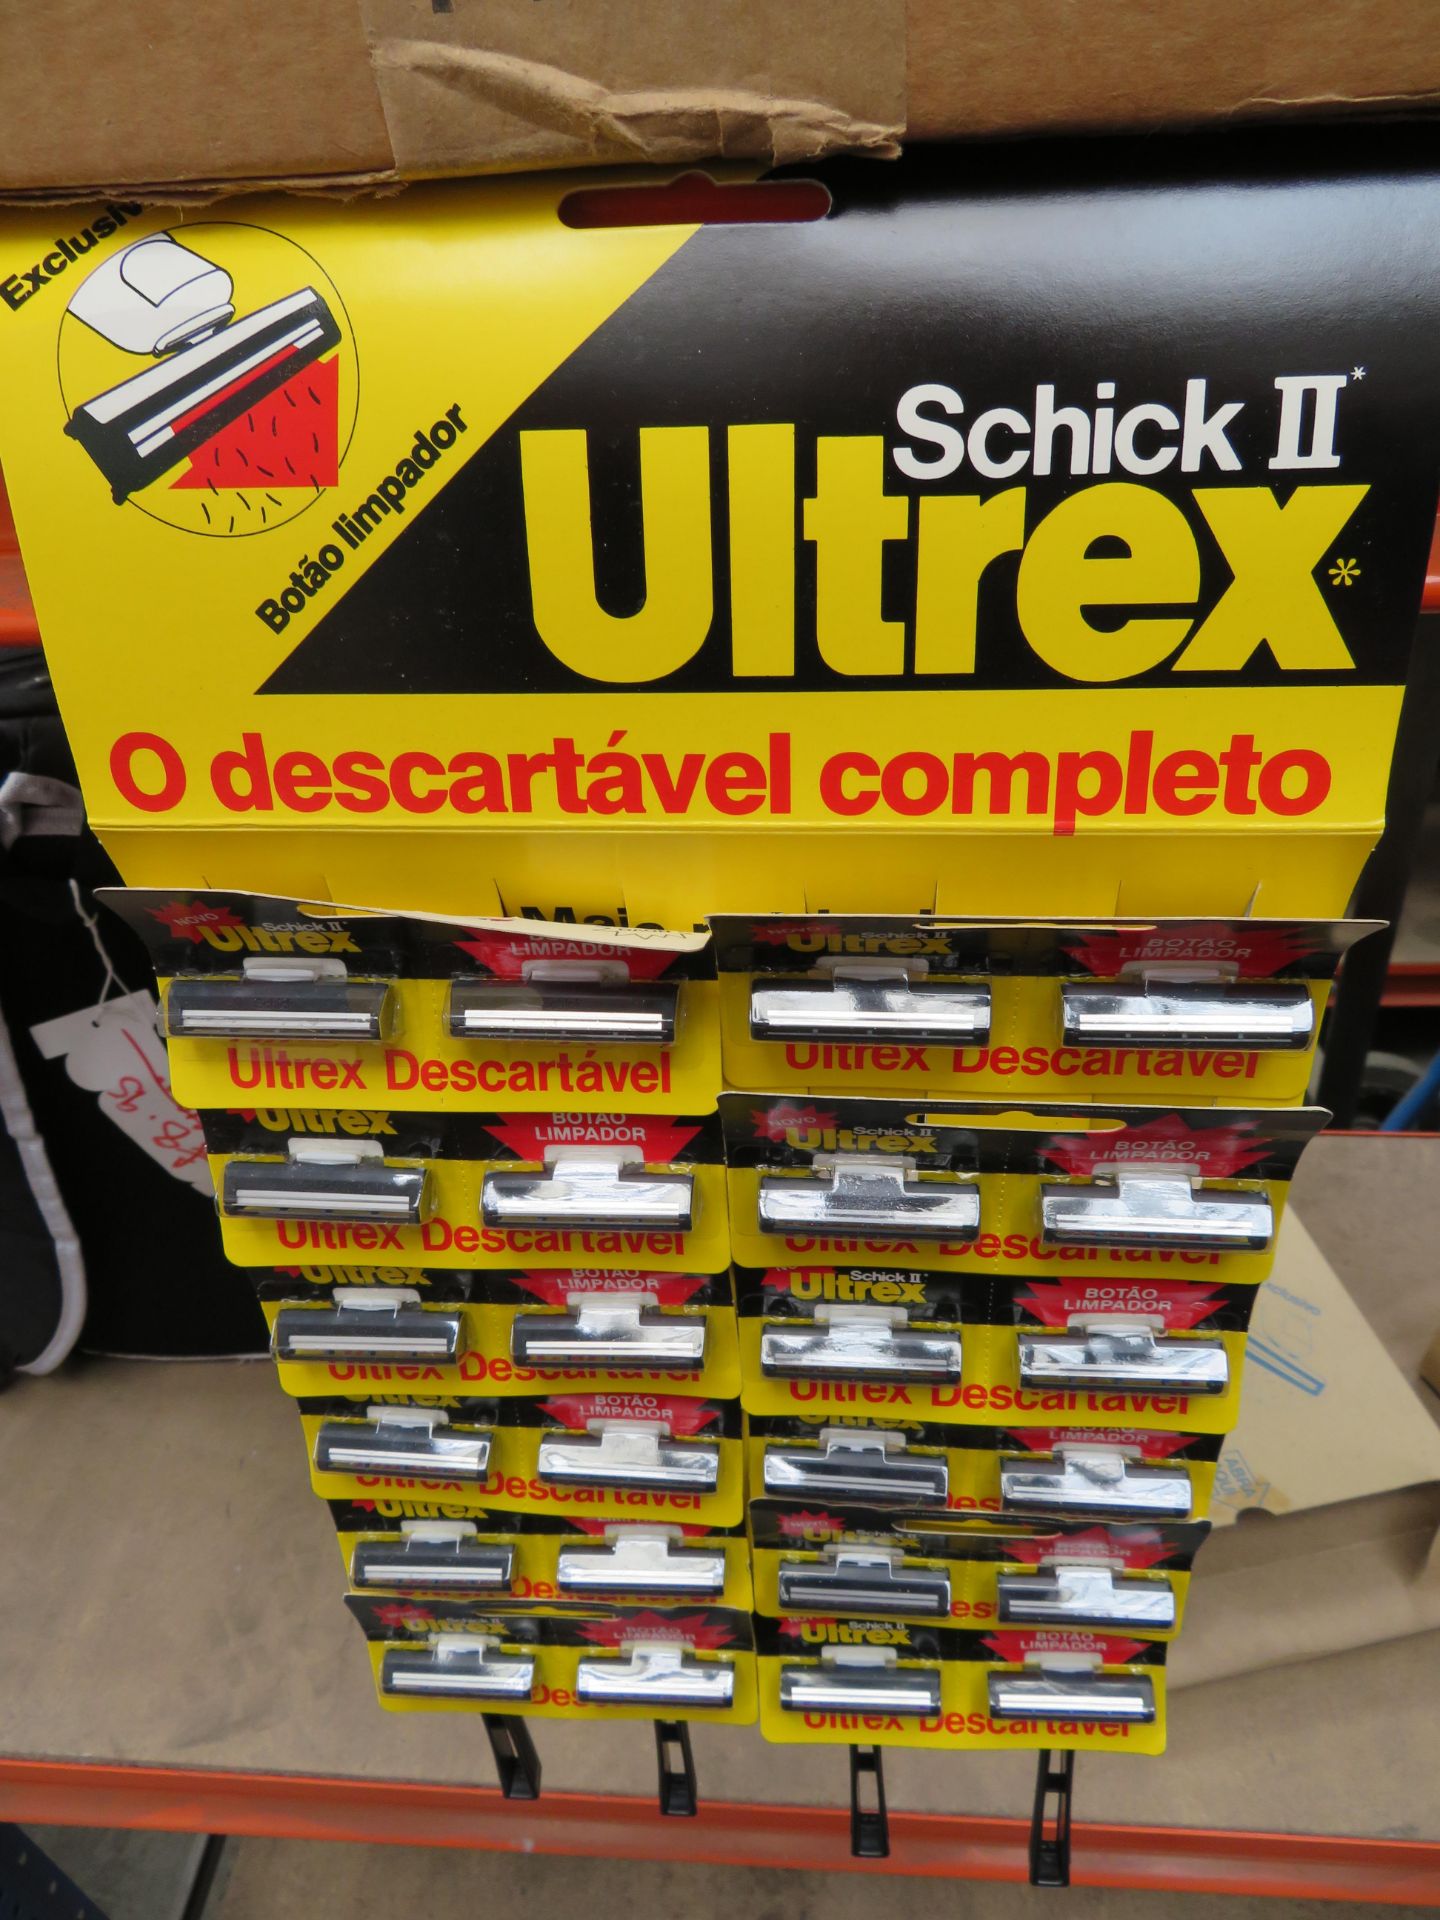 120 x Packs of 2 Ultrex Disposable Shavers. Brand New Stock. Surplus from a major UK retailer